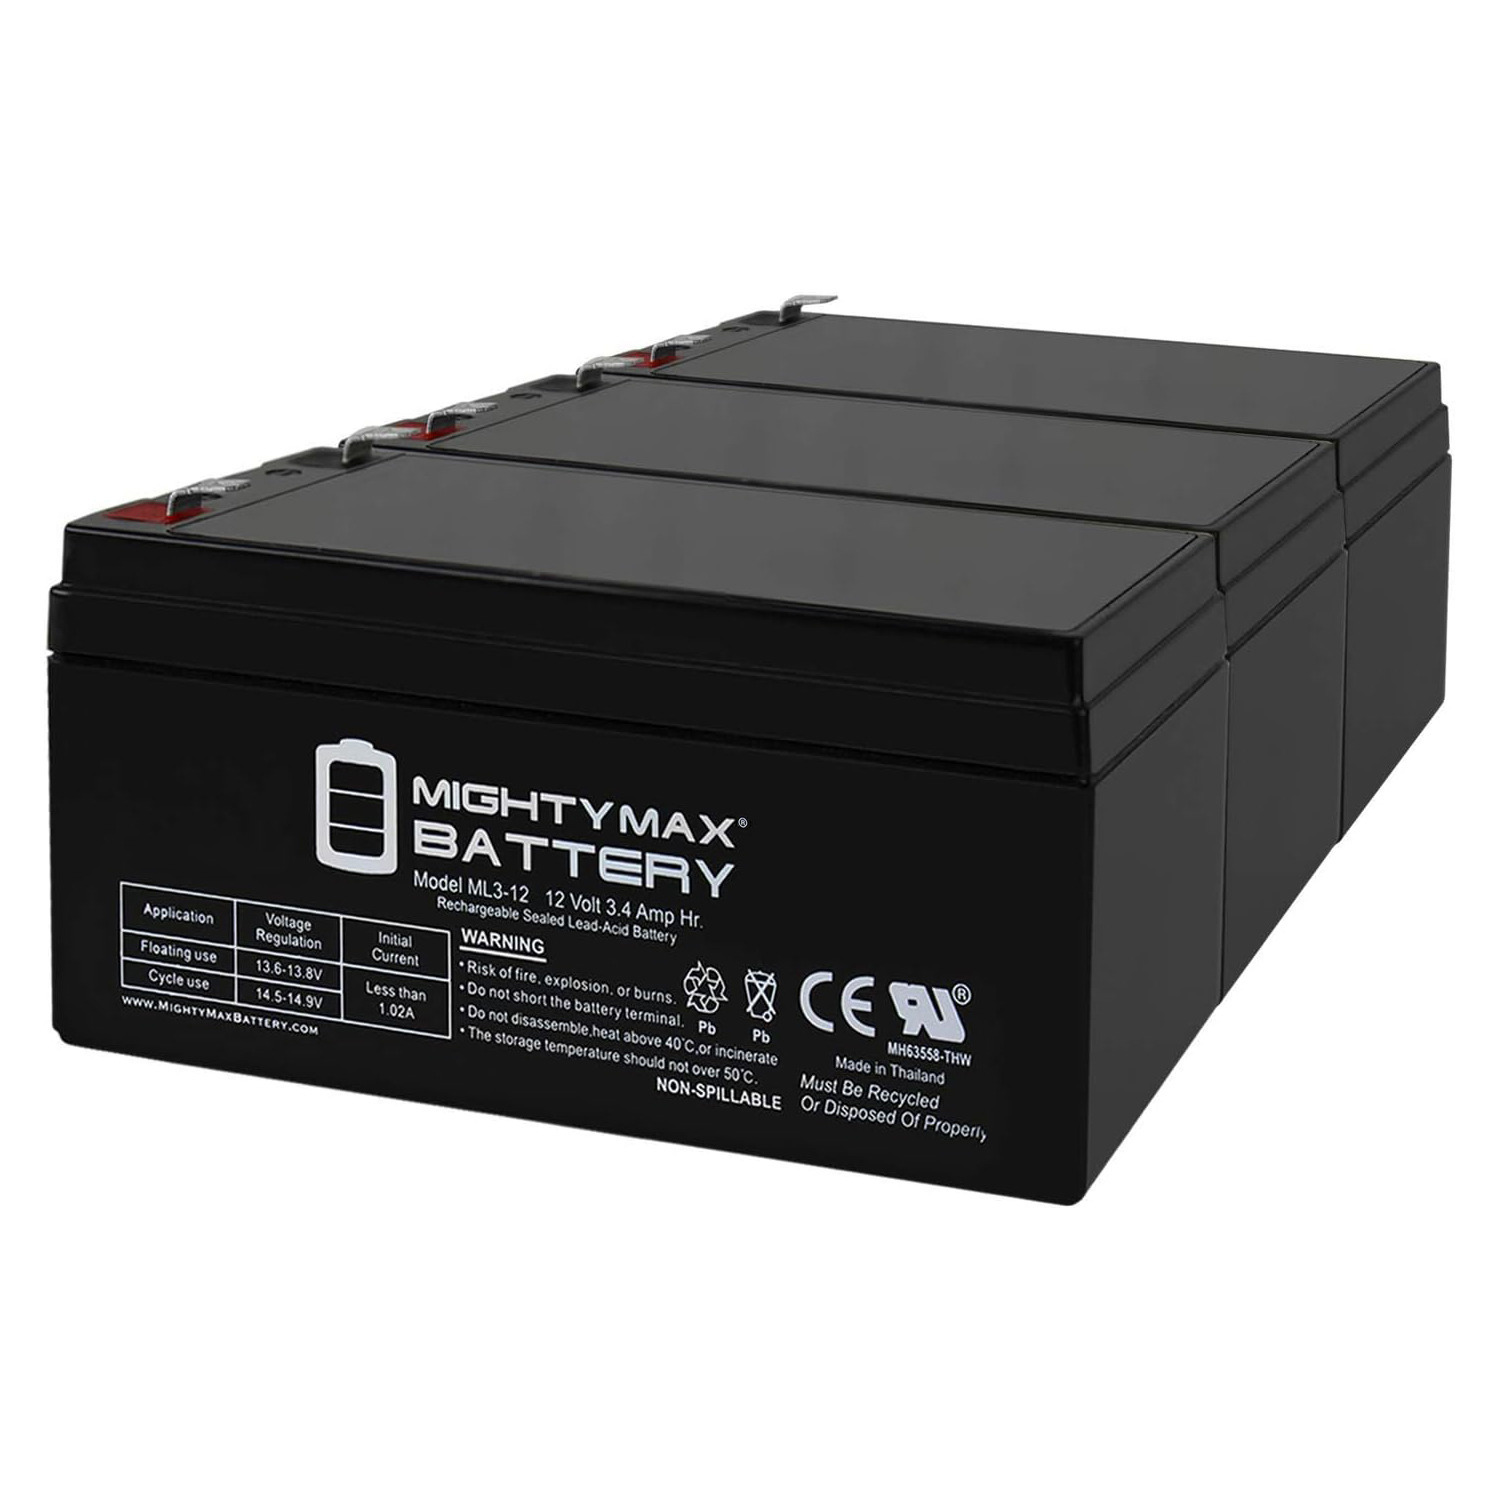 12V 3AH SLA Replacement Battery for Arthocome Console Amsco - 3 Pack